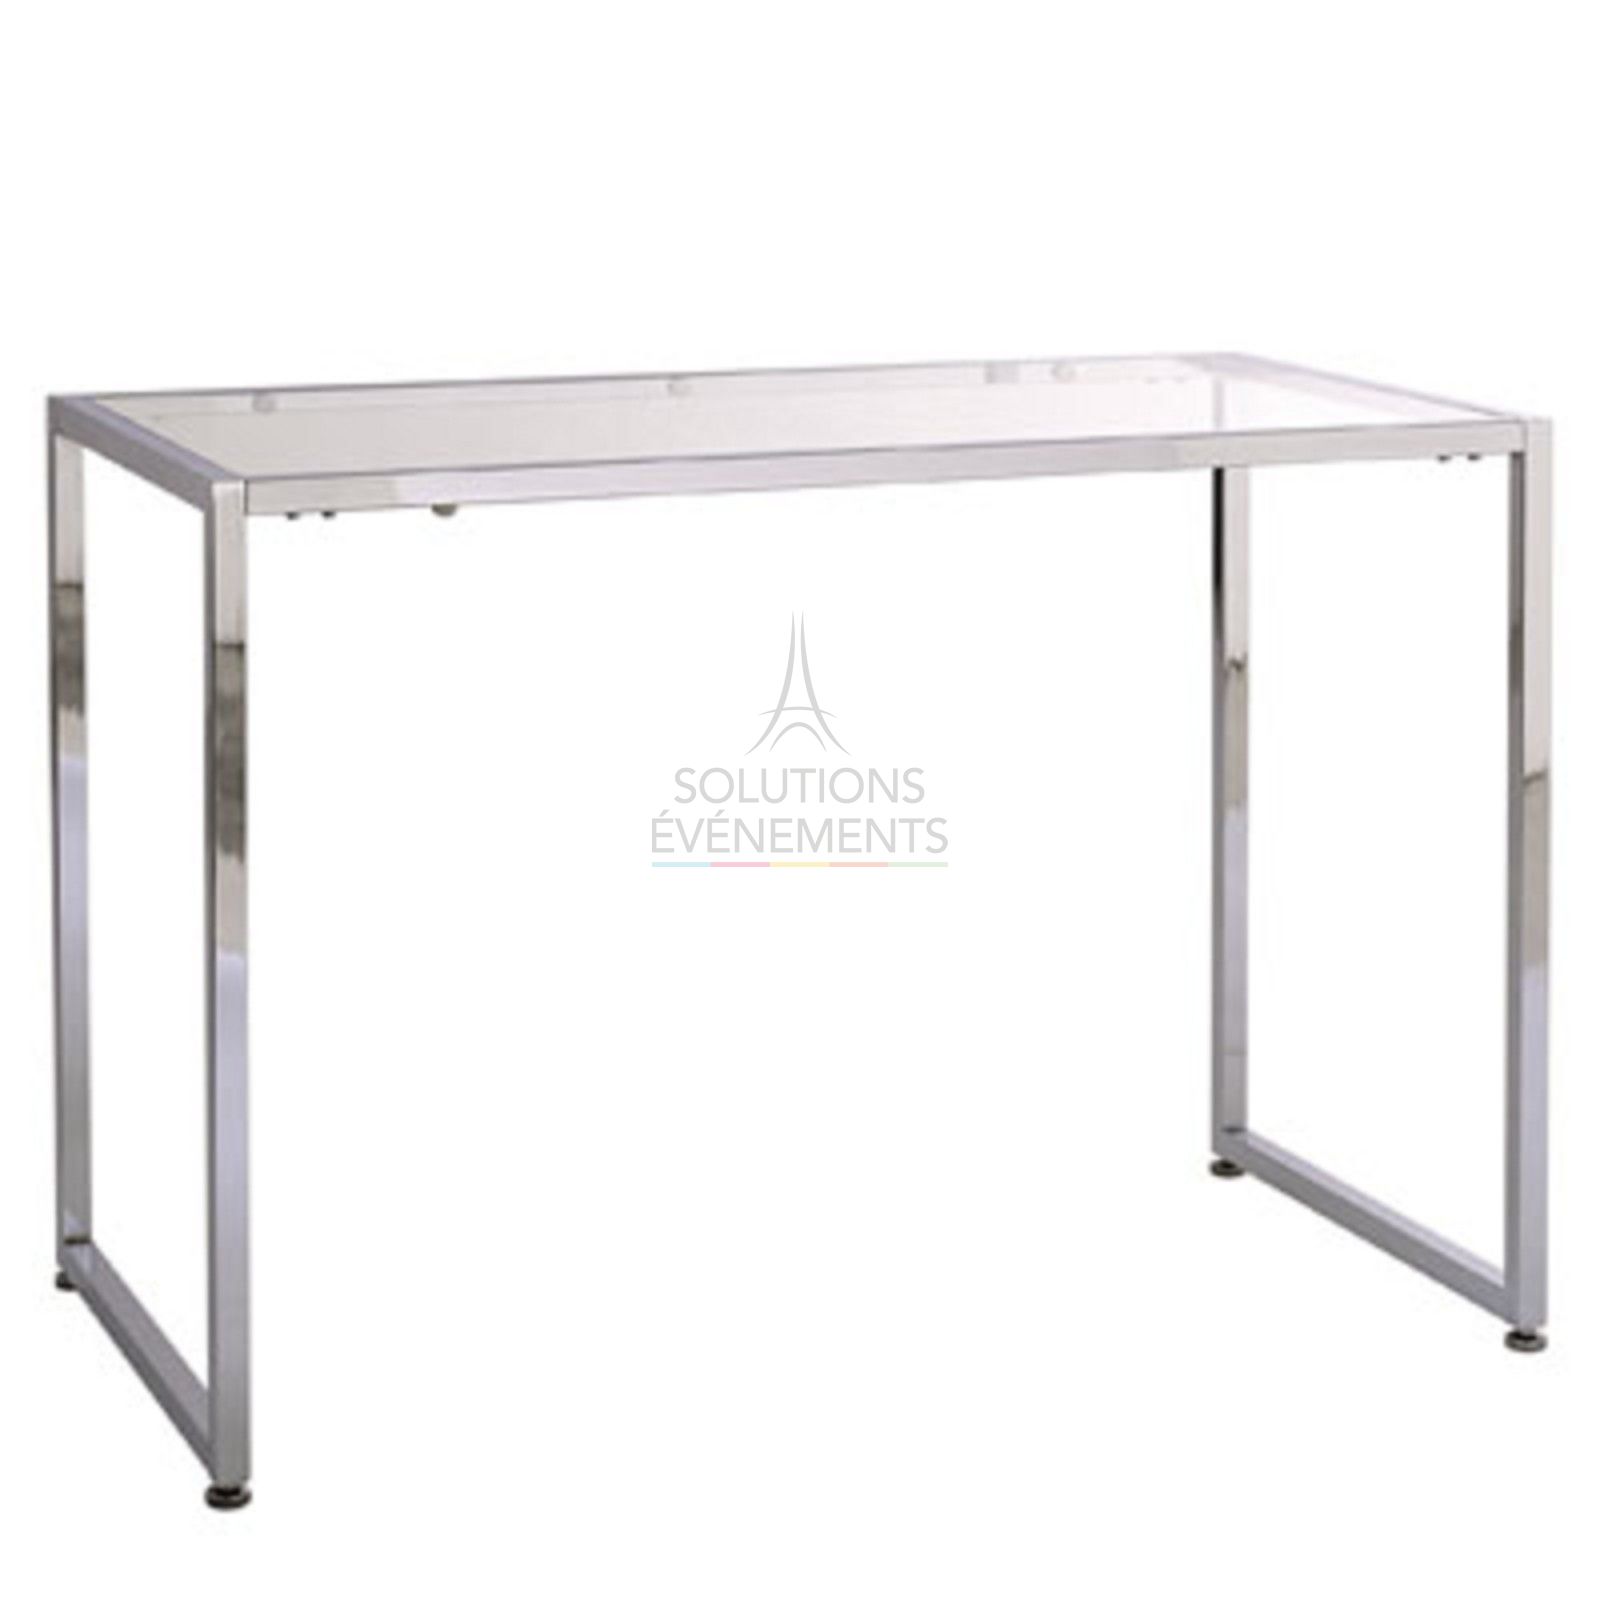 Designer console rental for your events